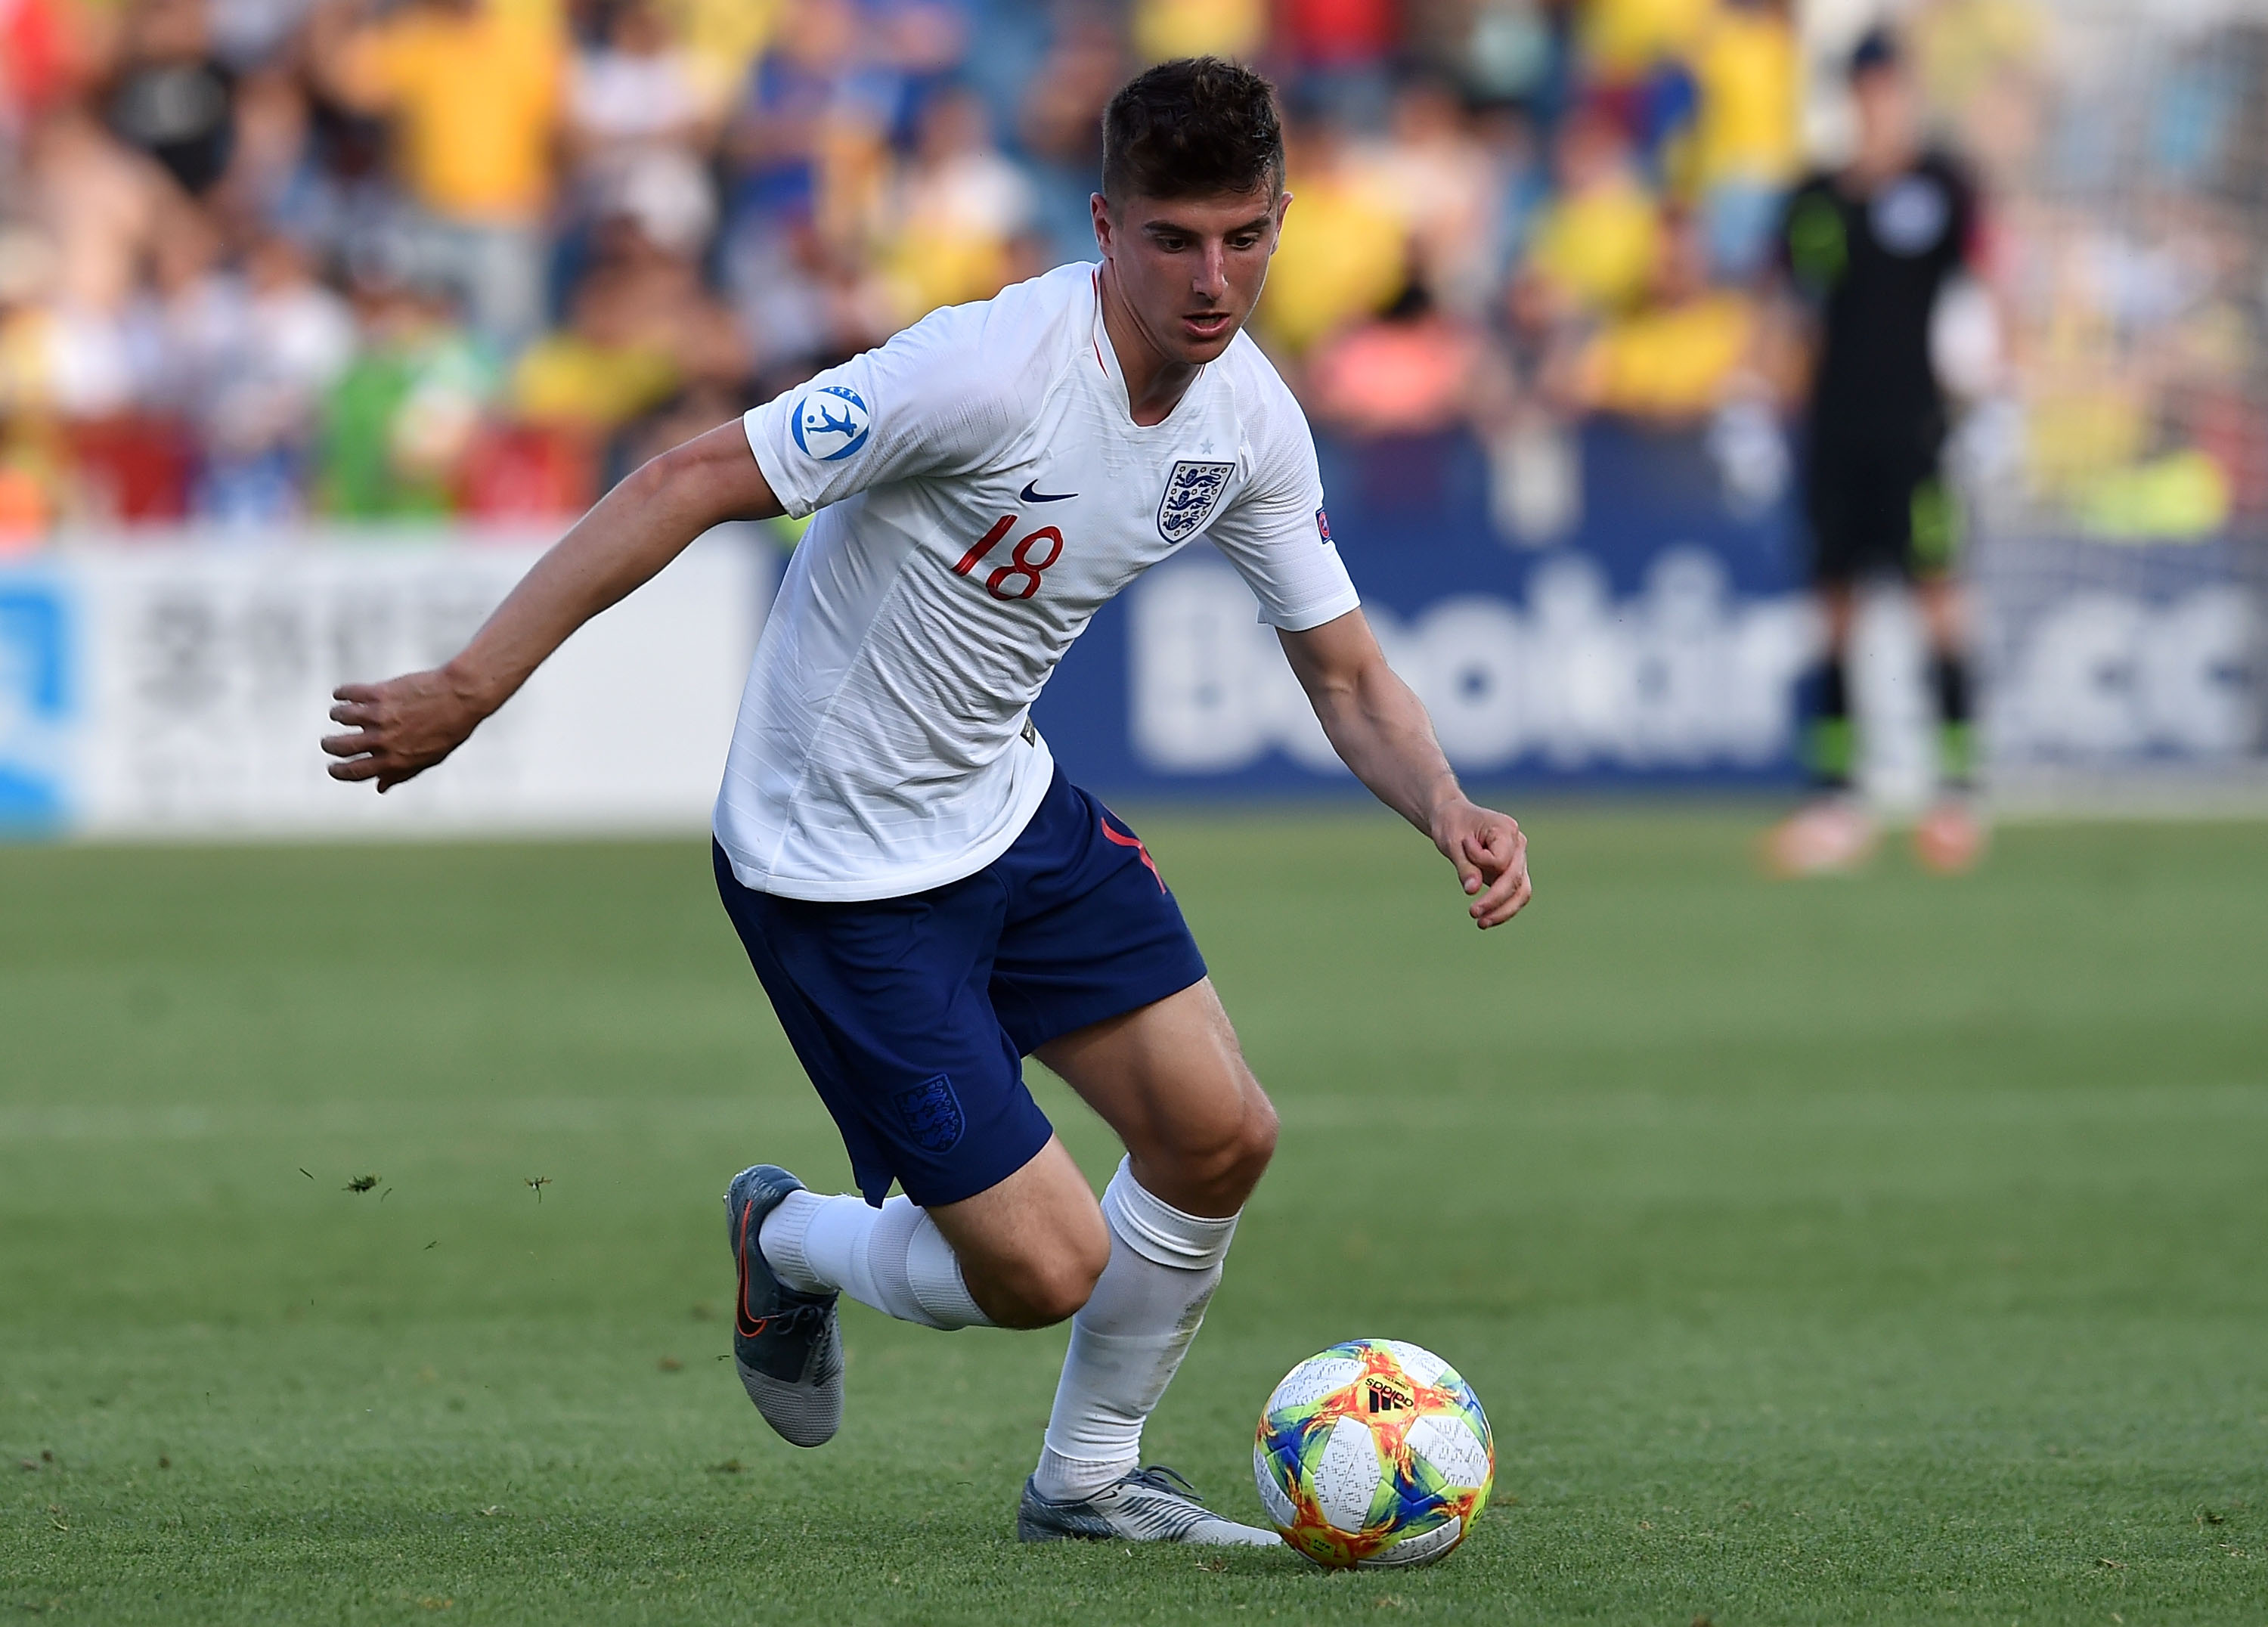 CESENA, ITALY - JUNE 21: Mason Mount of England in action during the 2019 UEFA U-21 Group C match between England and Romania at Dino Manuzzi Stadium on June 21, 2019 in Cesena, Italy.  (Photo by Giuseppe Bellini/Getty Images)